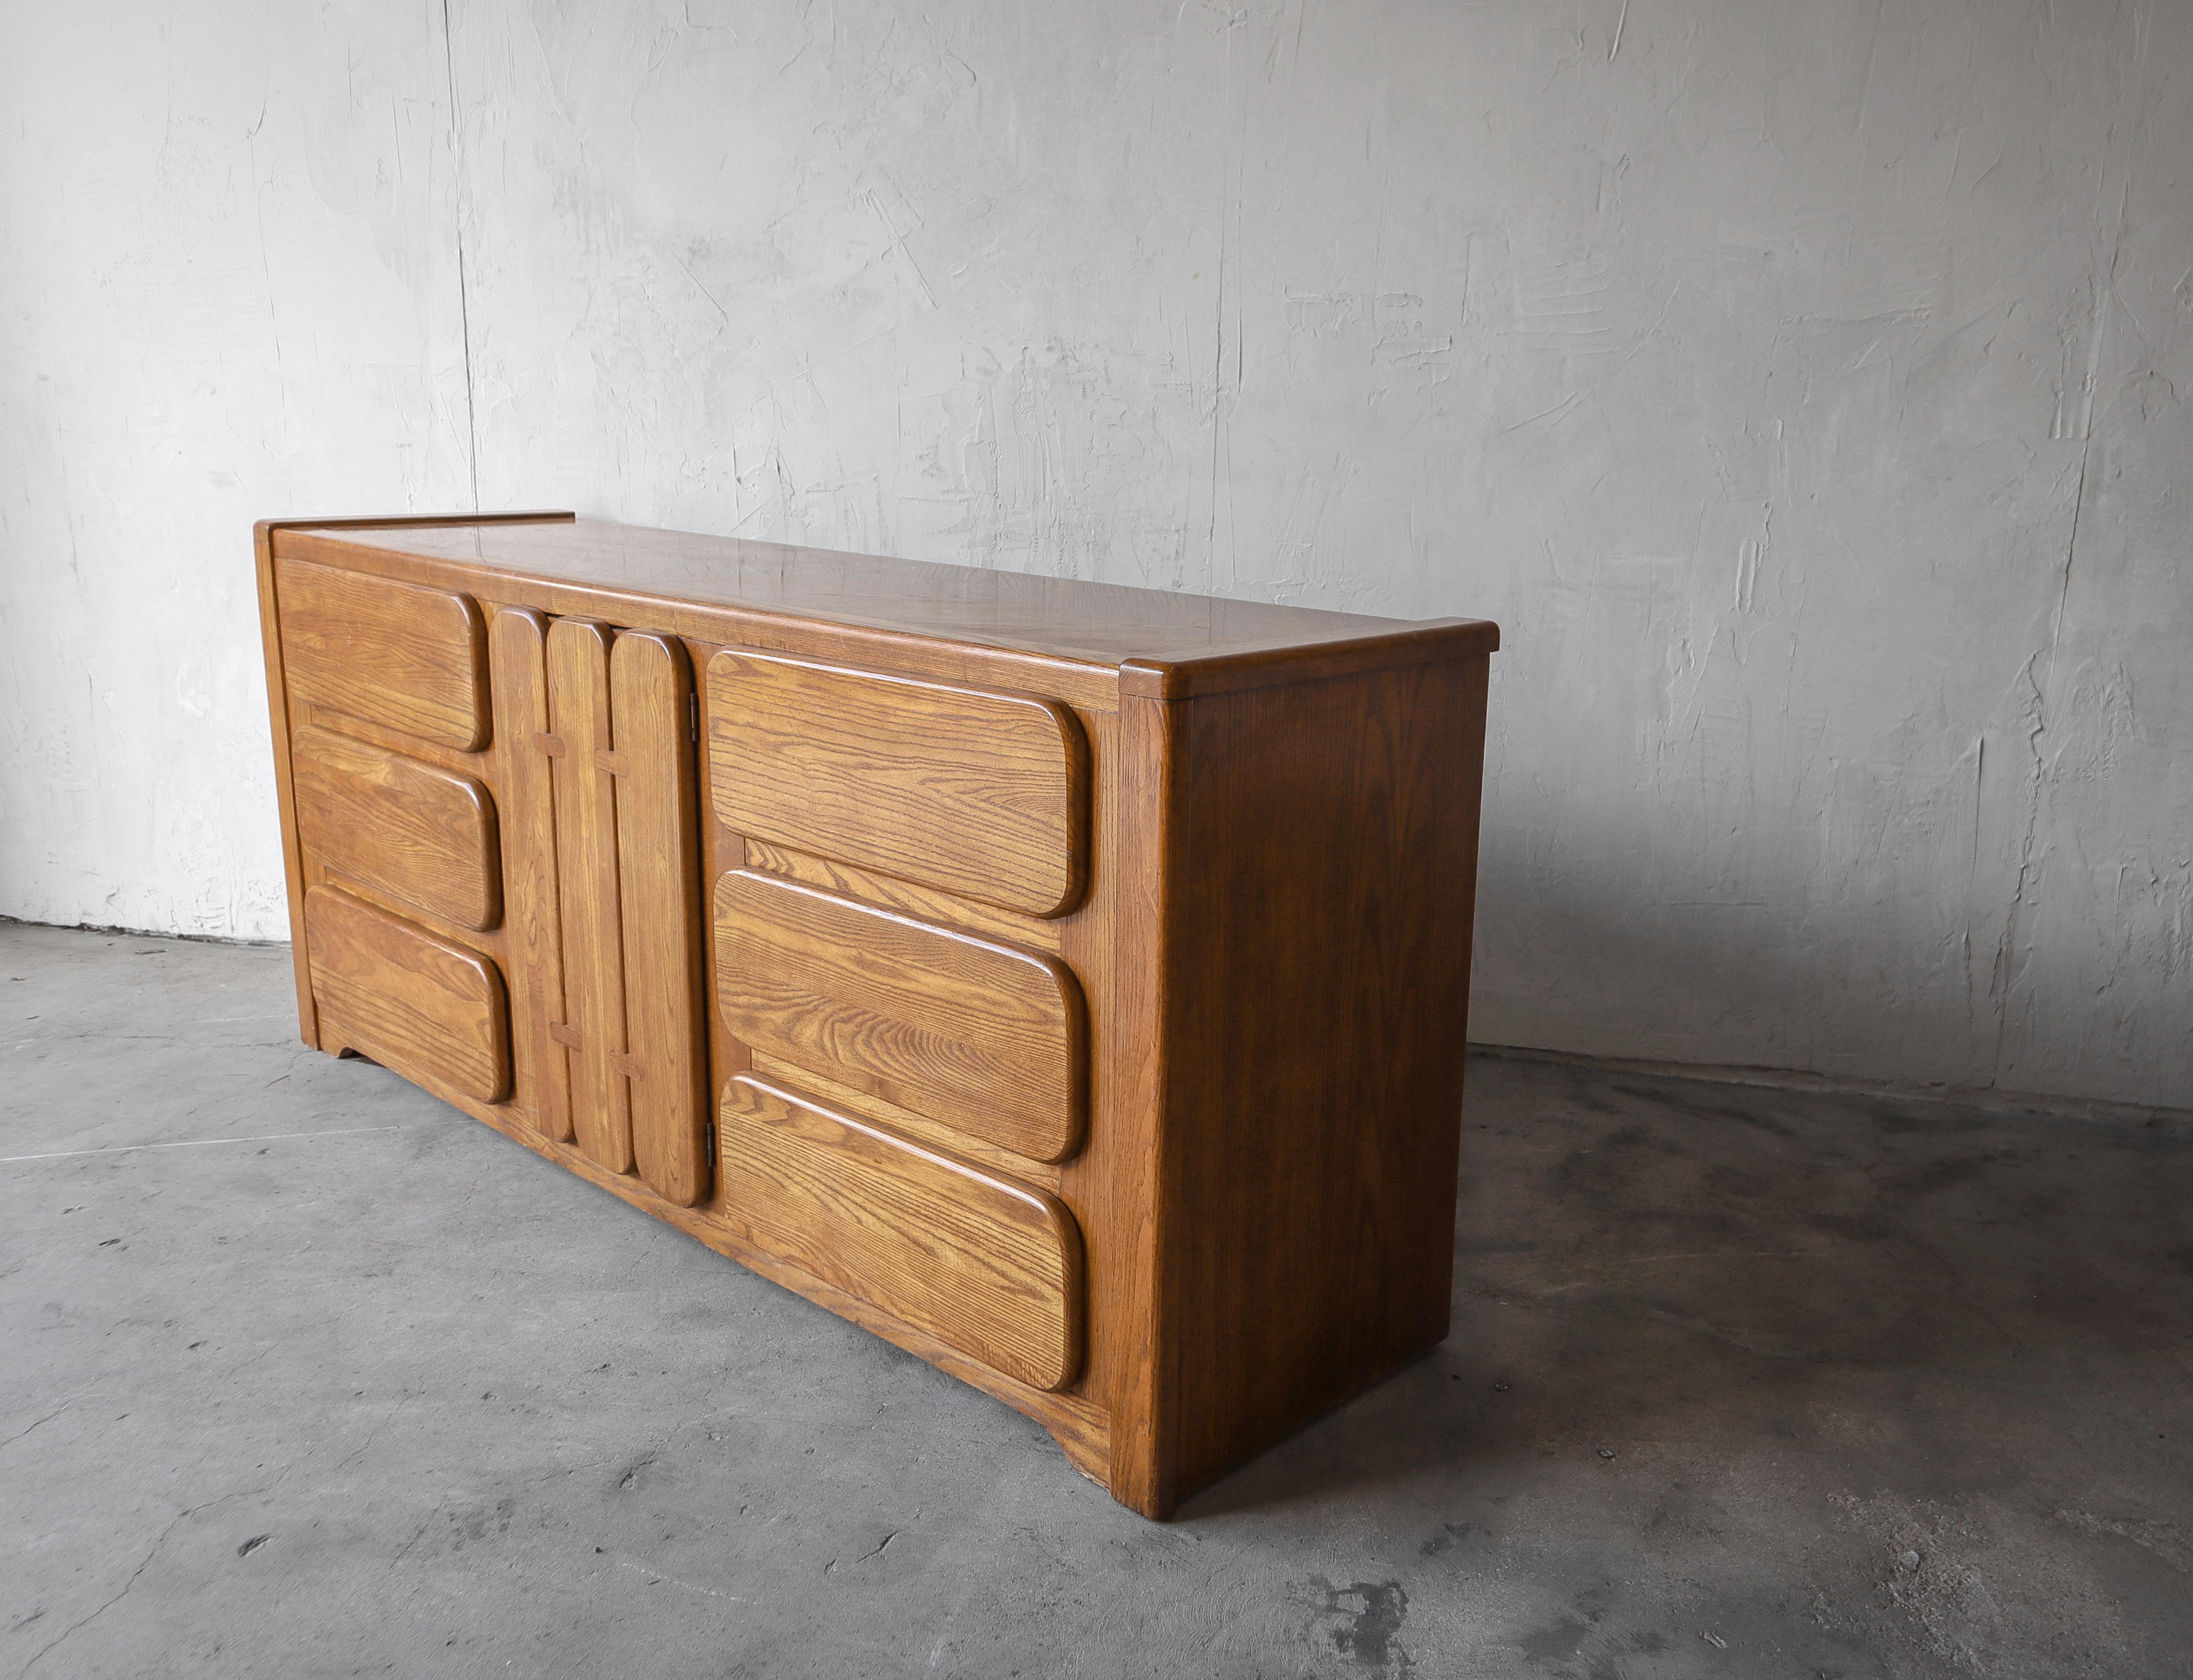 Simple, organic oak dresser by Stanley. The cabinet is constructed out of beautifully grained oak, the rounded edge details give this piece quite a bit of visual interest. Its versatile style can mesh well in many decor styles and any room. Can be